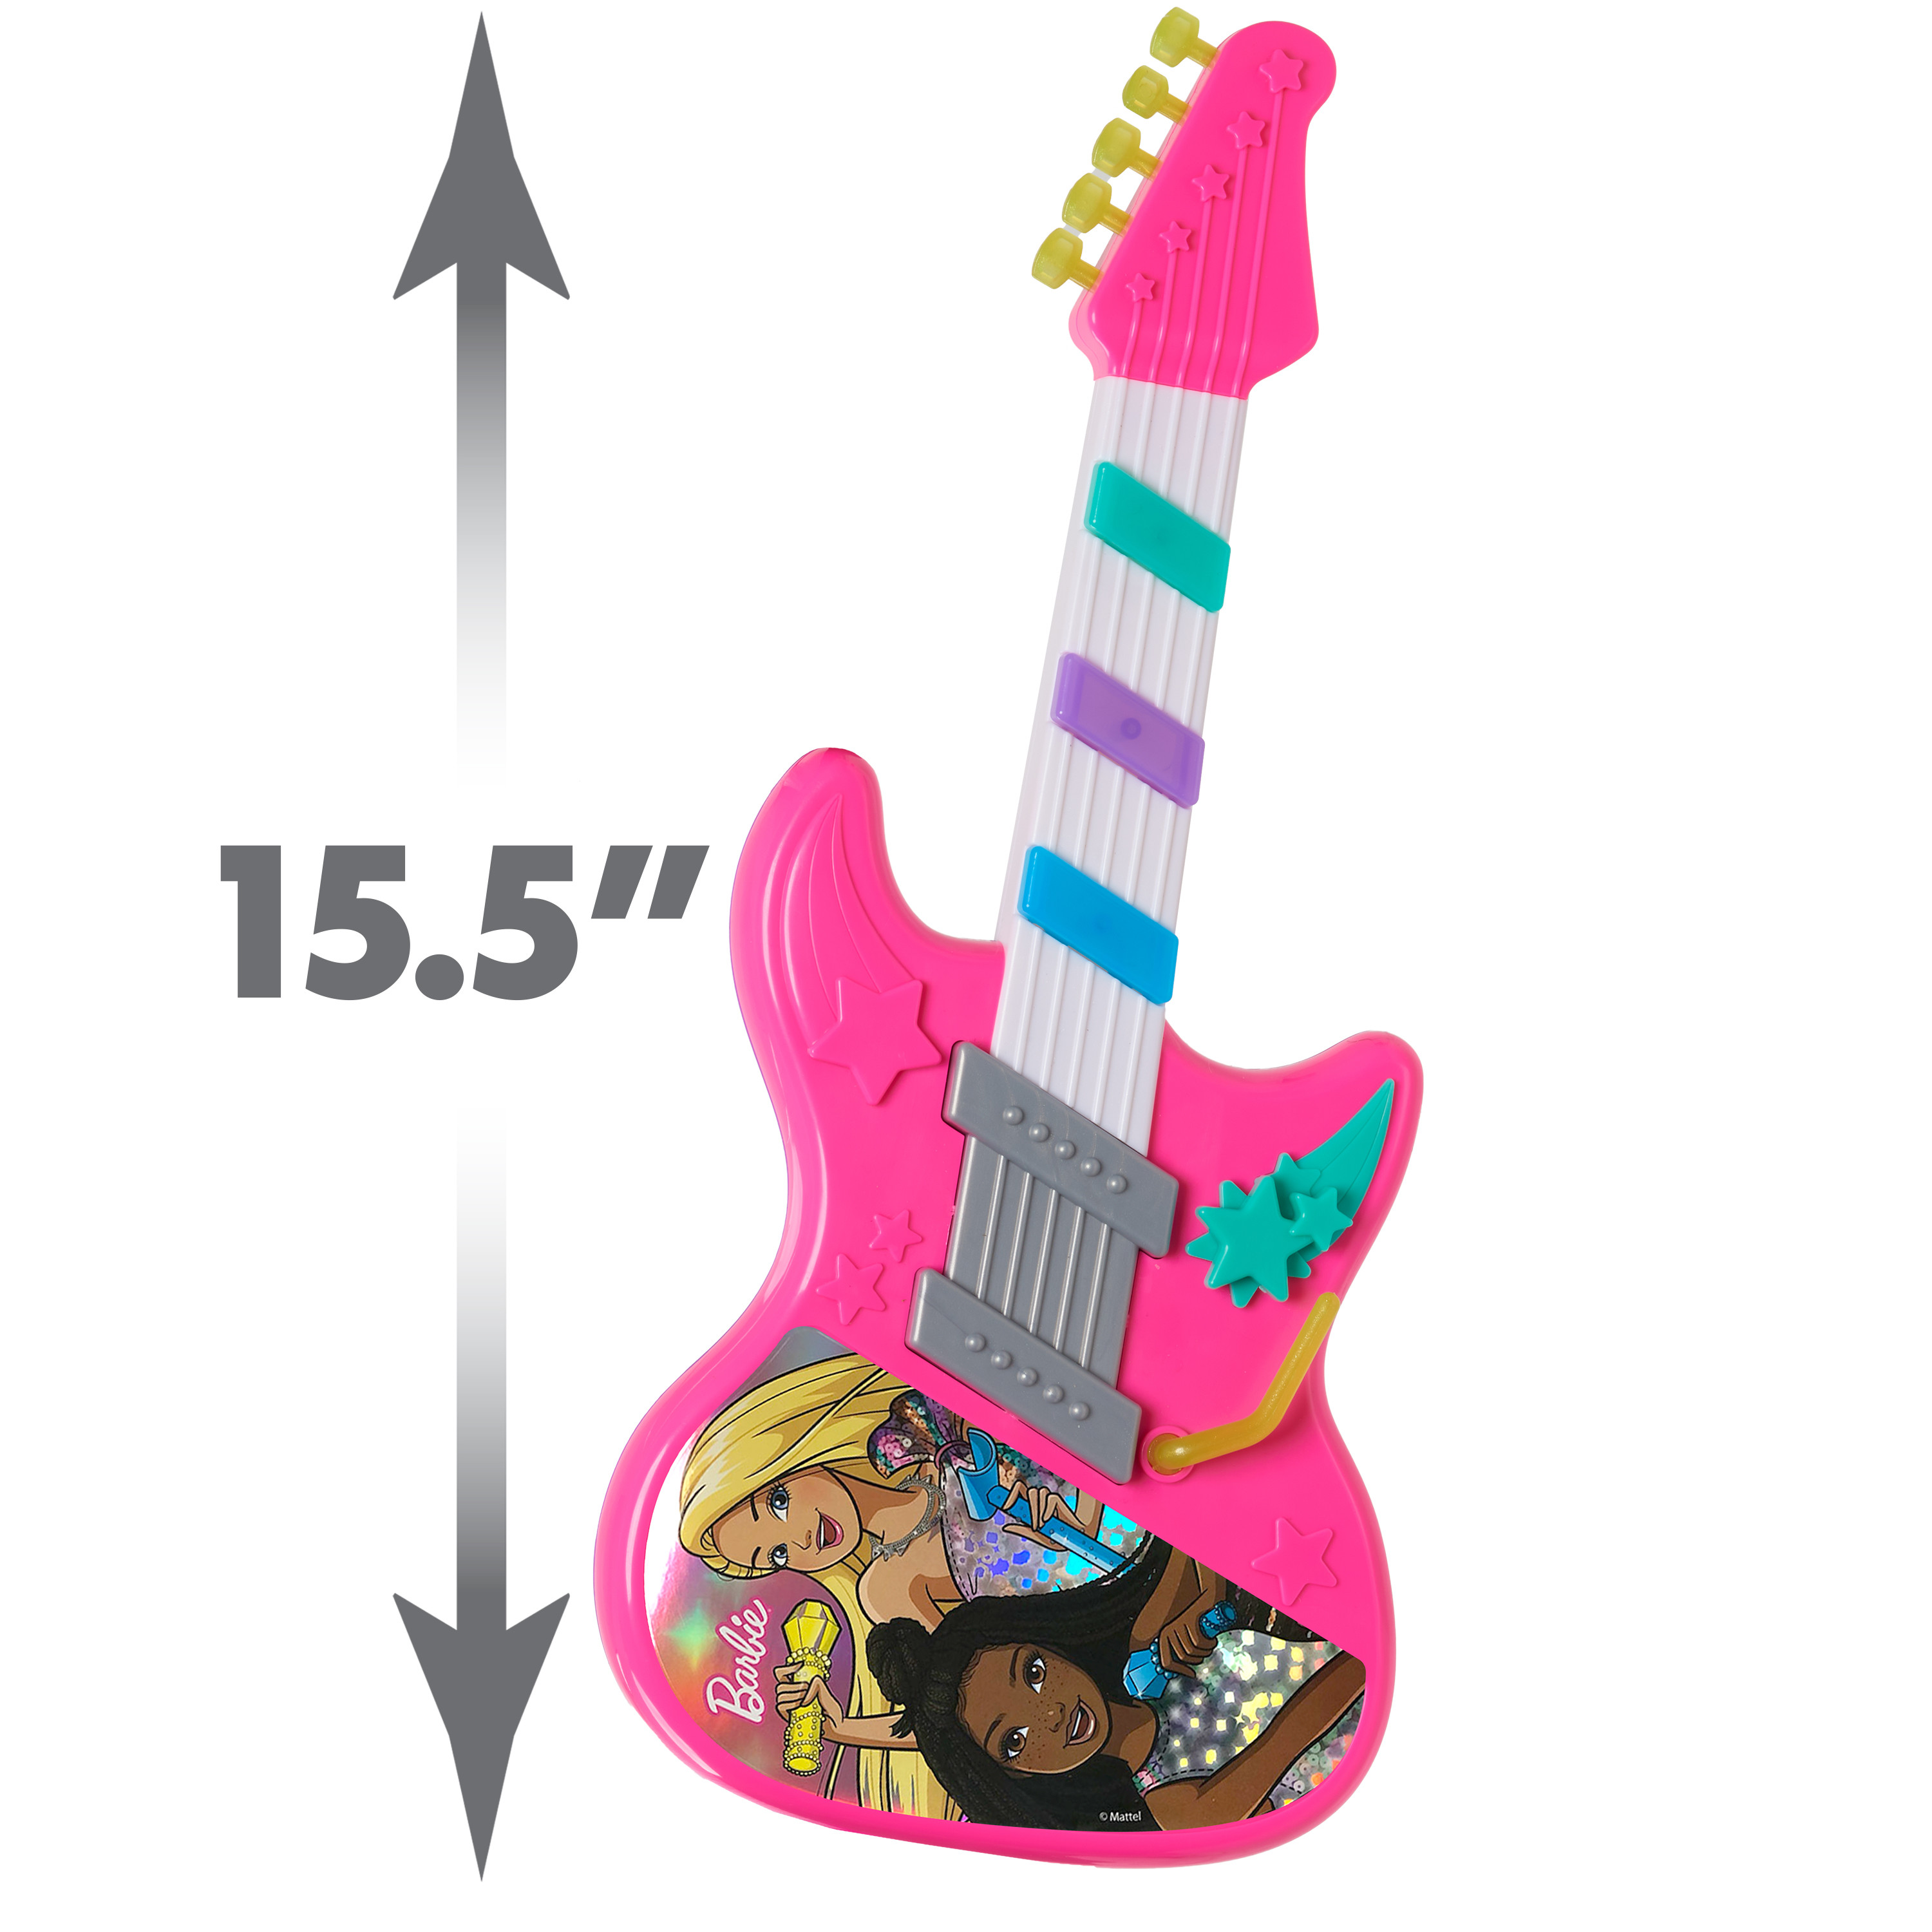 Barbie Rock Star Guitar, Interactive Electronic Toy Guitar with Lights, Sounds, and Microphone,  Kids Toys for Ages 3 Up, Gifts and Presents - image 5 of 11